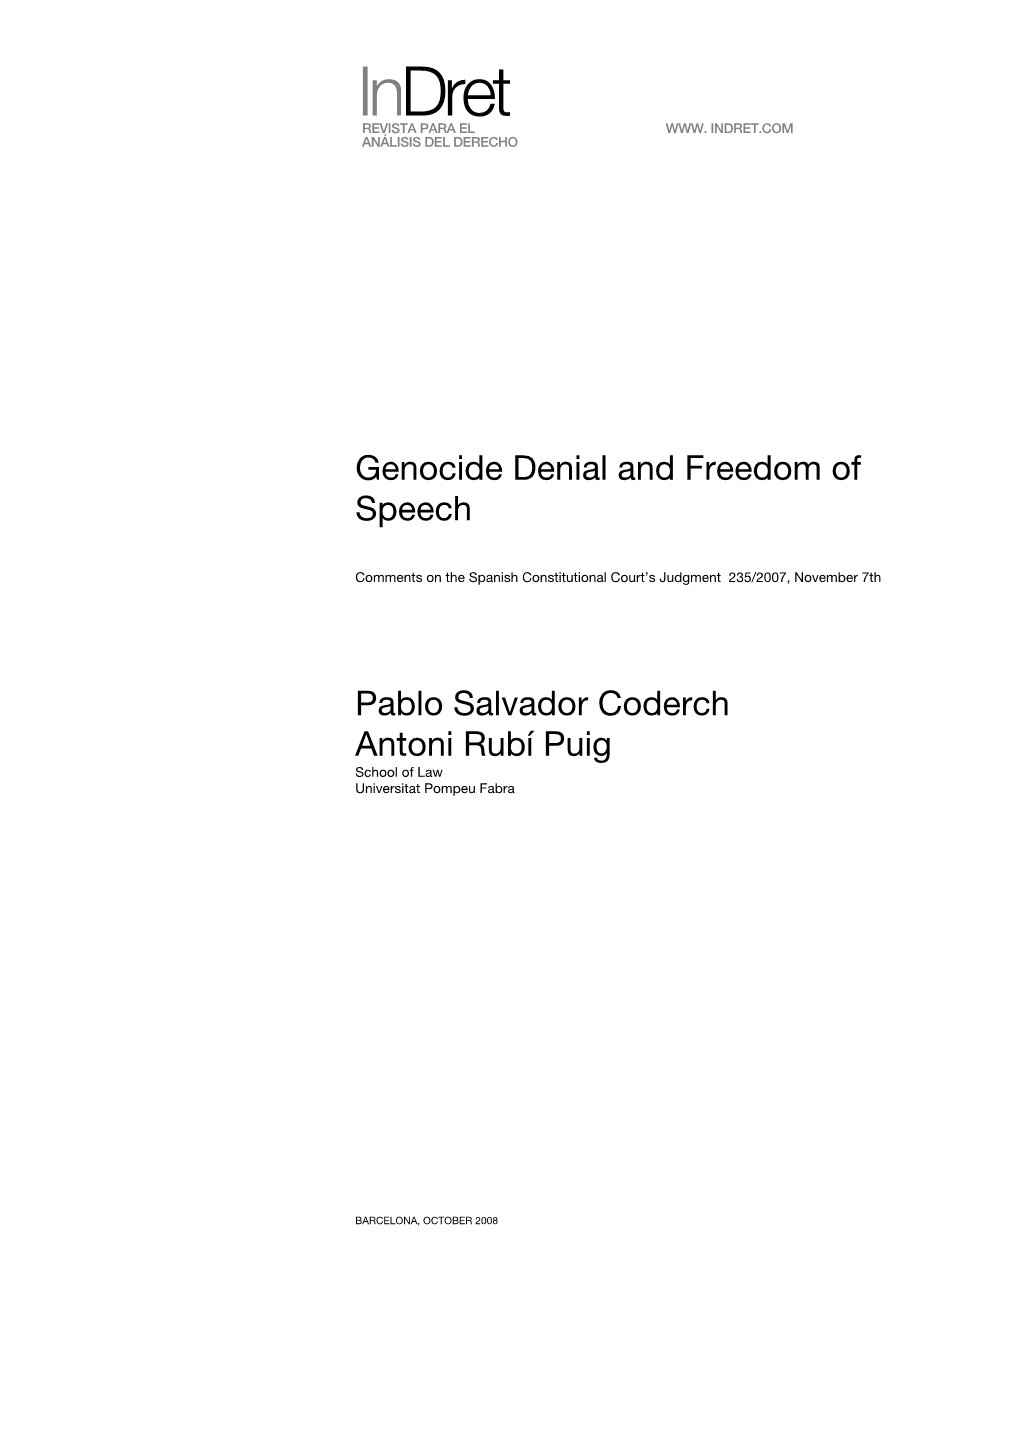 Genocide Denial and Freedom of Speech